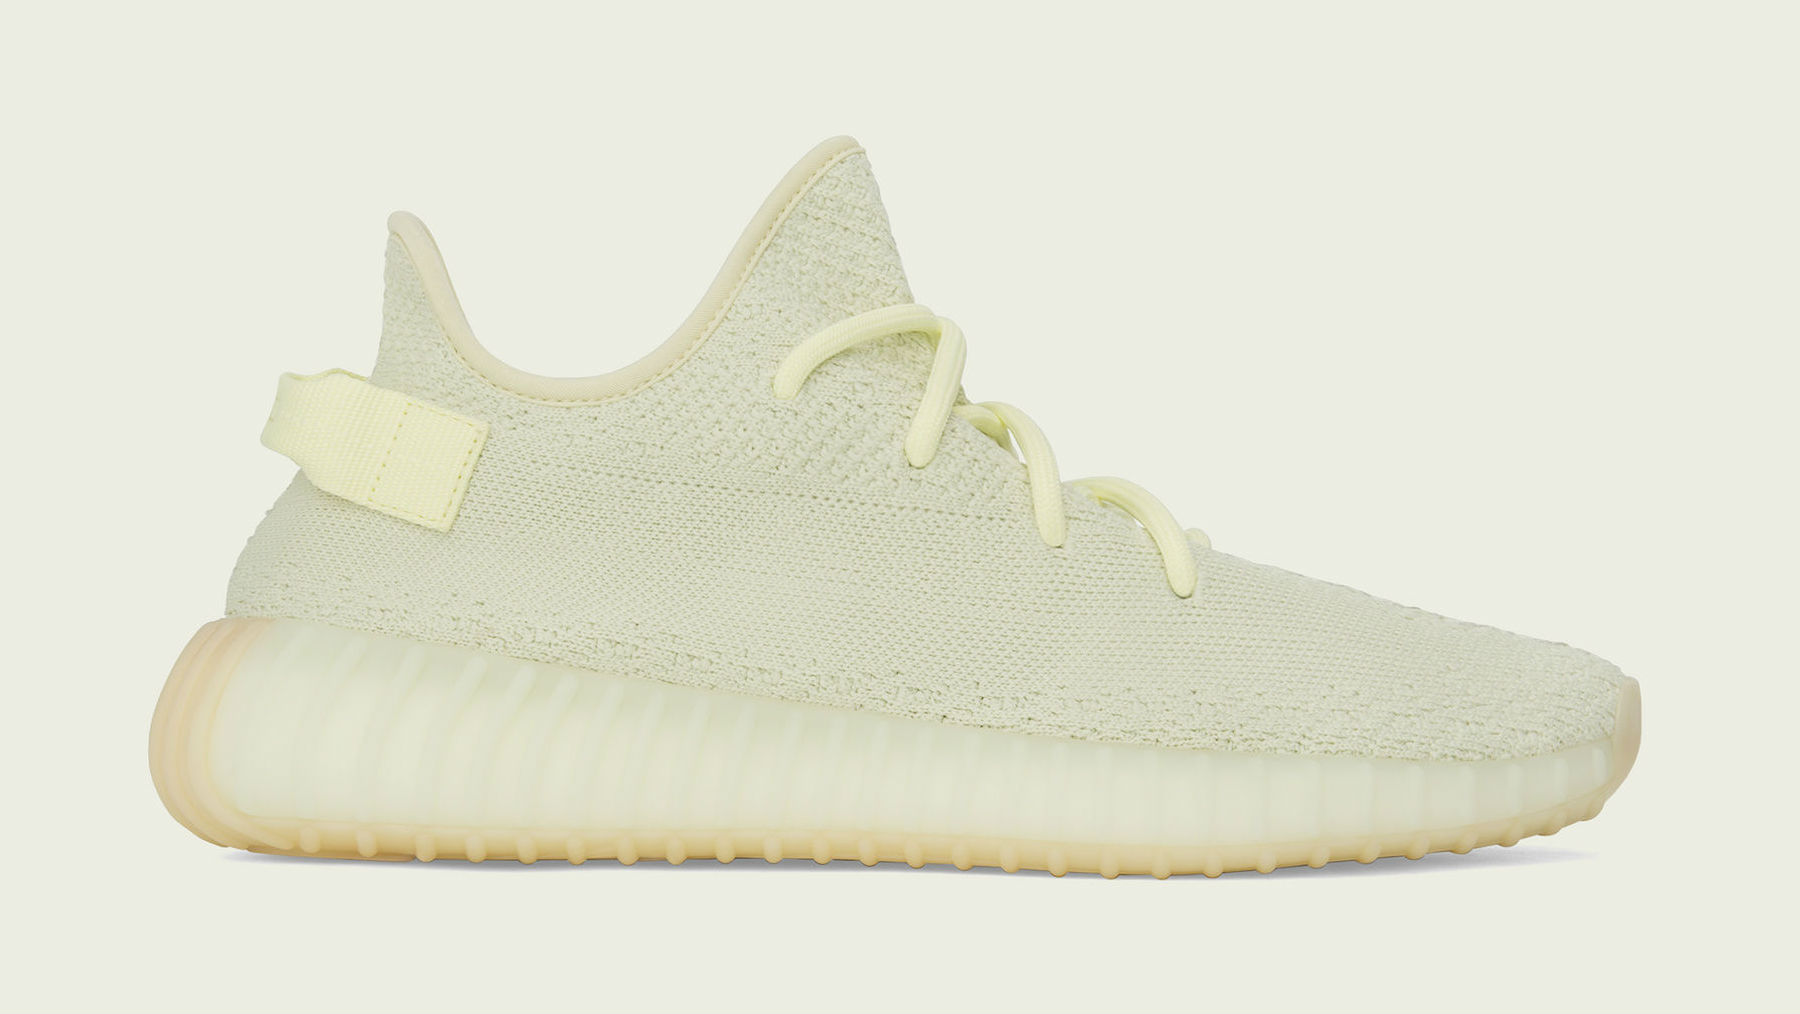 Adidas Yeezy Boost 350 V2 Butter Release Date F36980